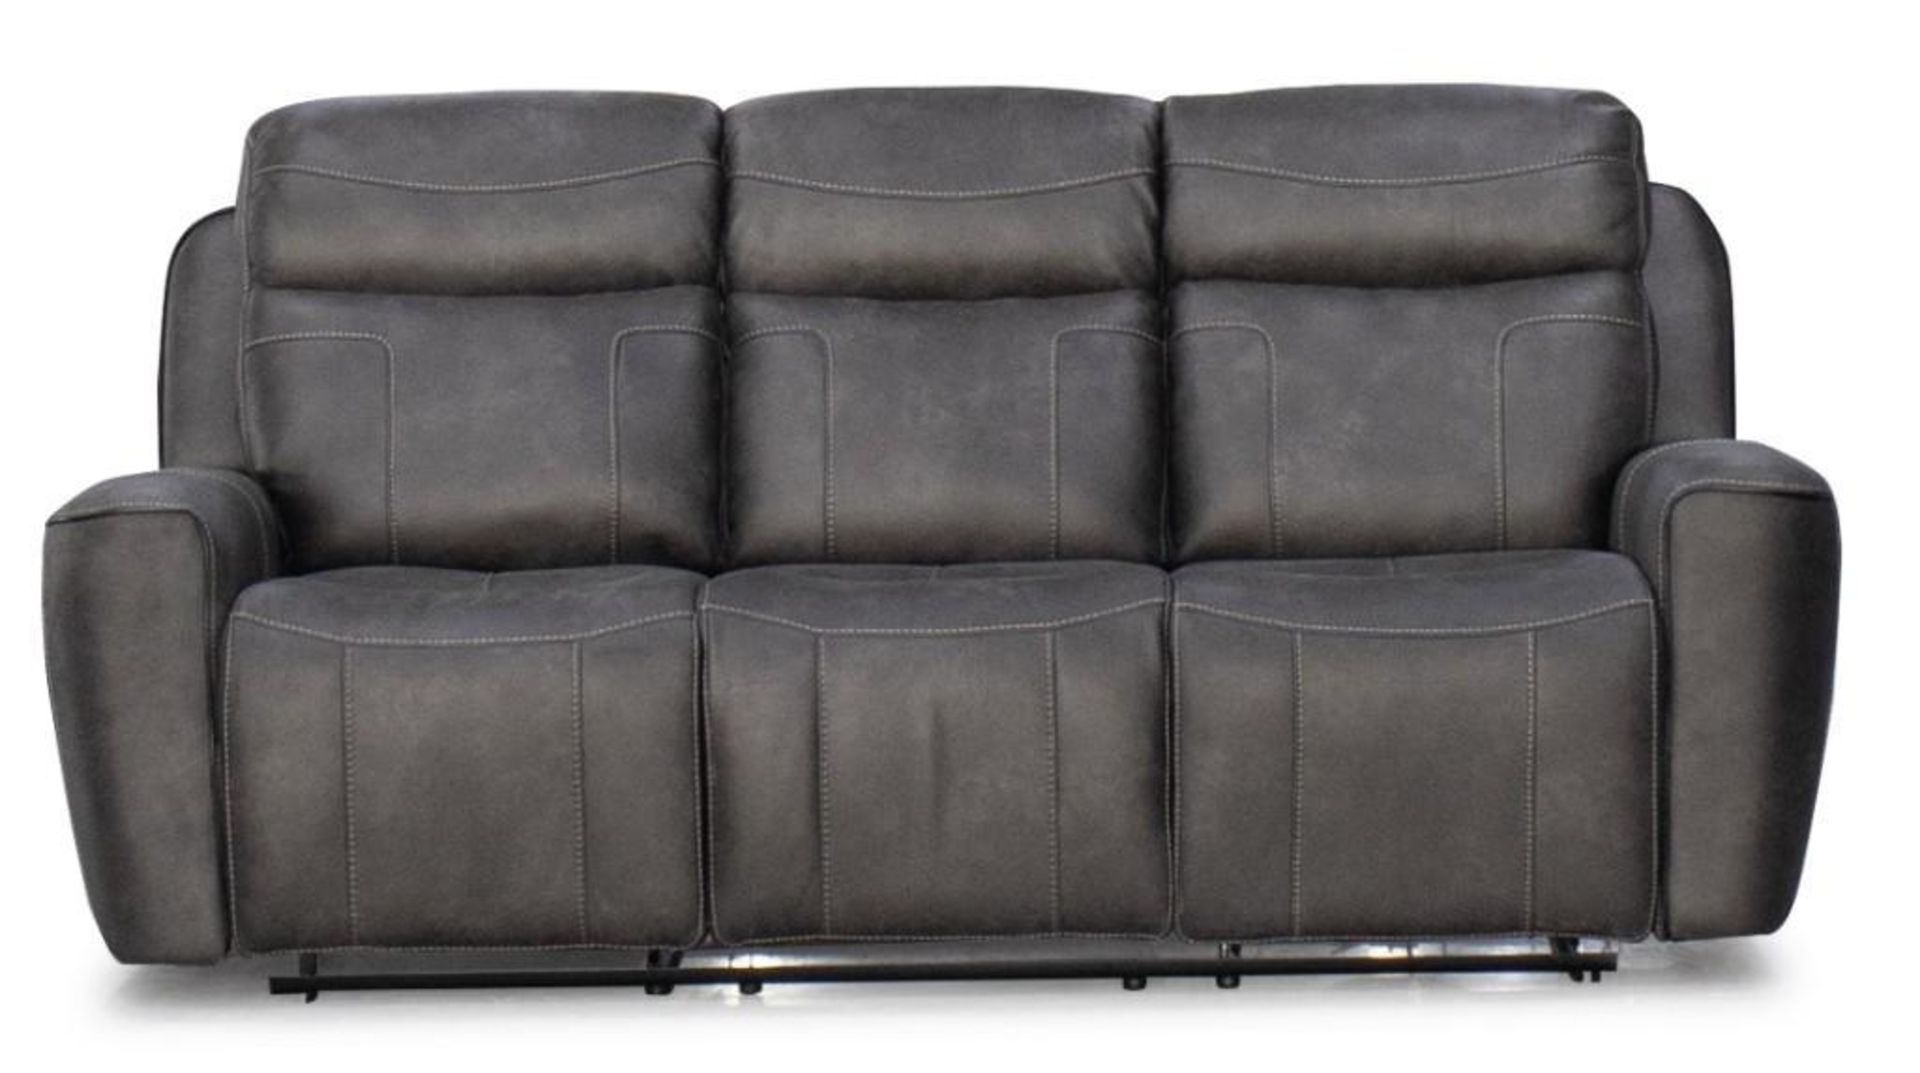 Brand new & Boxed Luxor 3 seater Electric reclining fabric sofa - Image 2 of 3